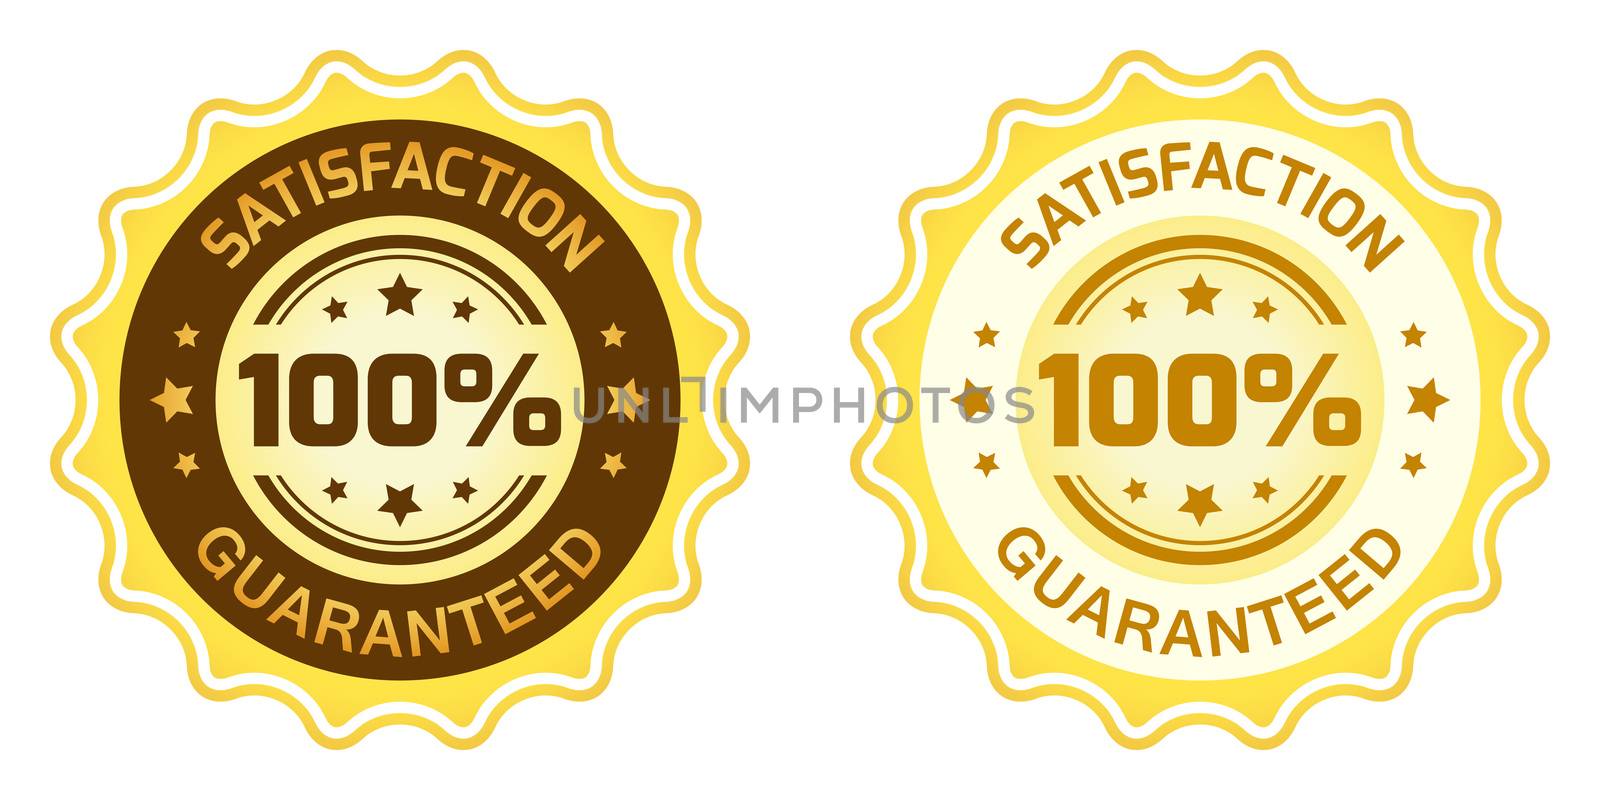 100 Satisfaction Guaranteed Label isolated on white background